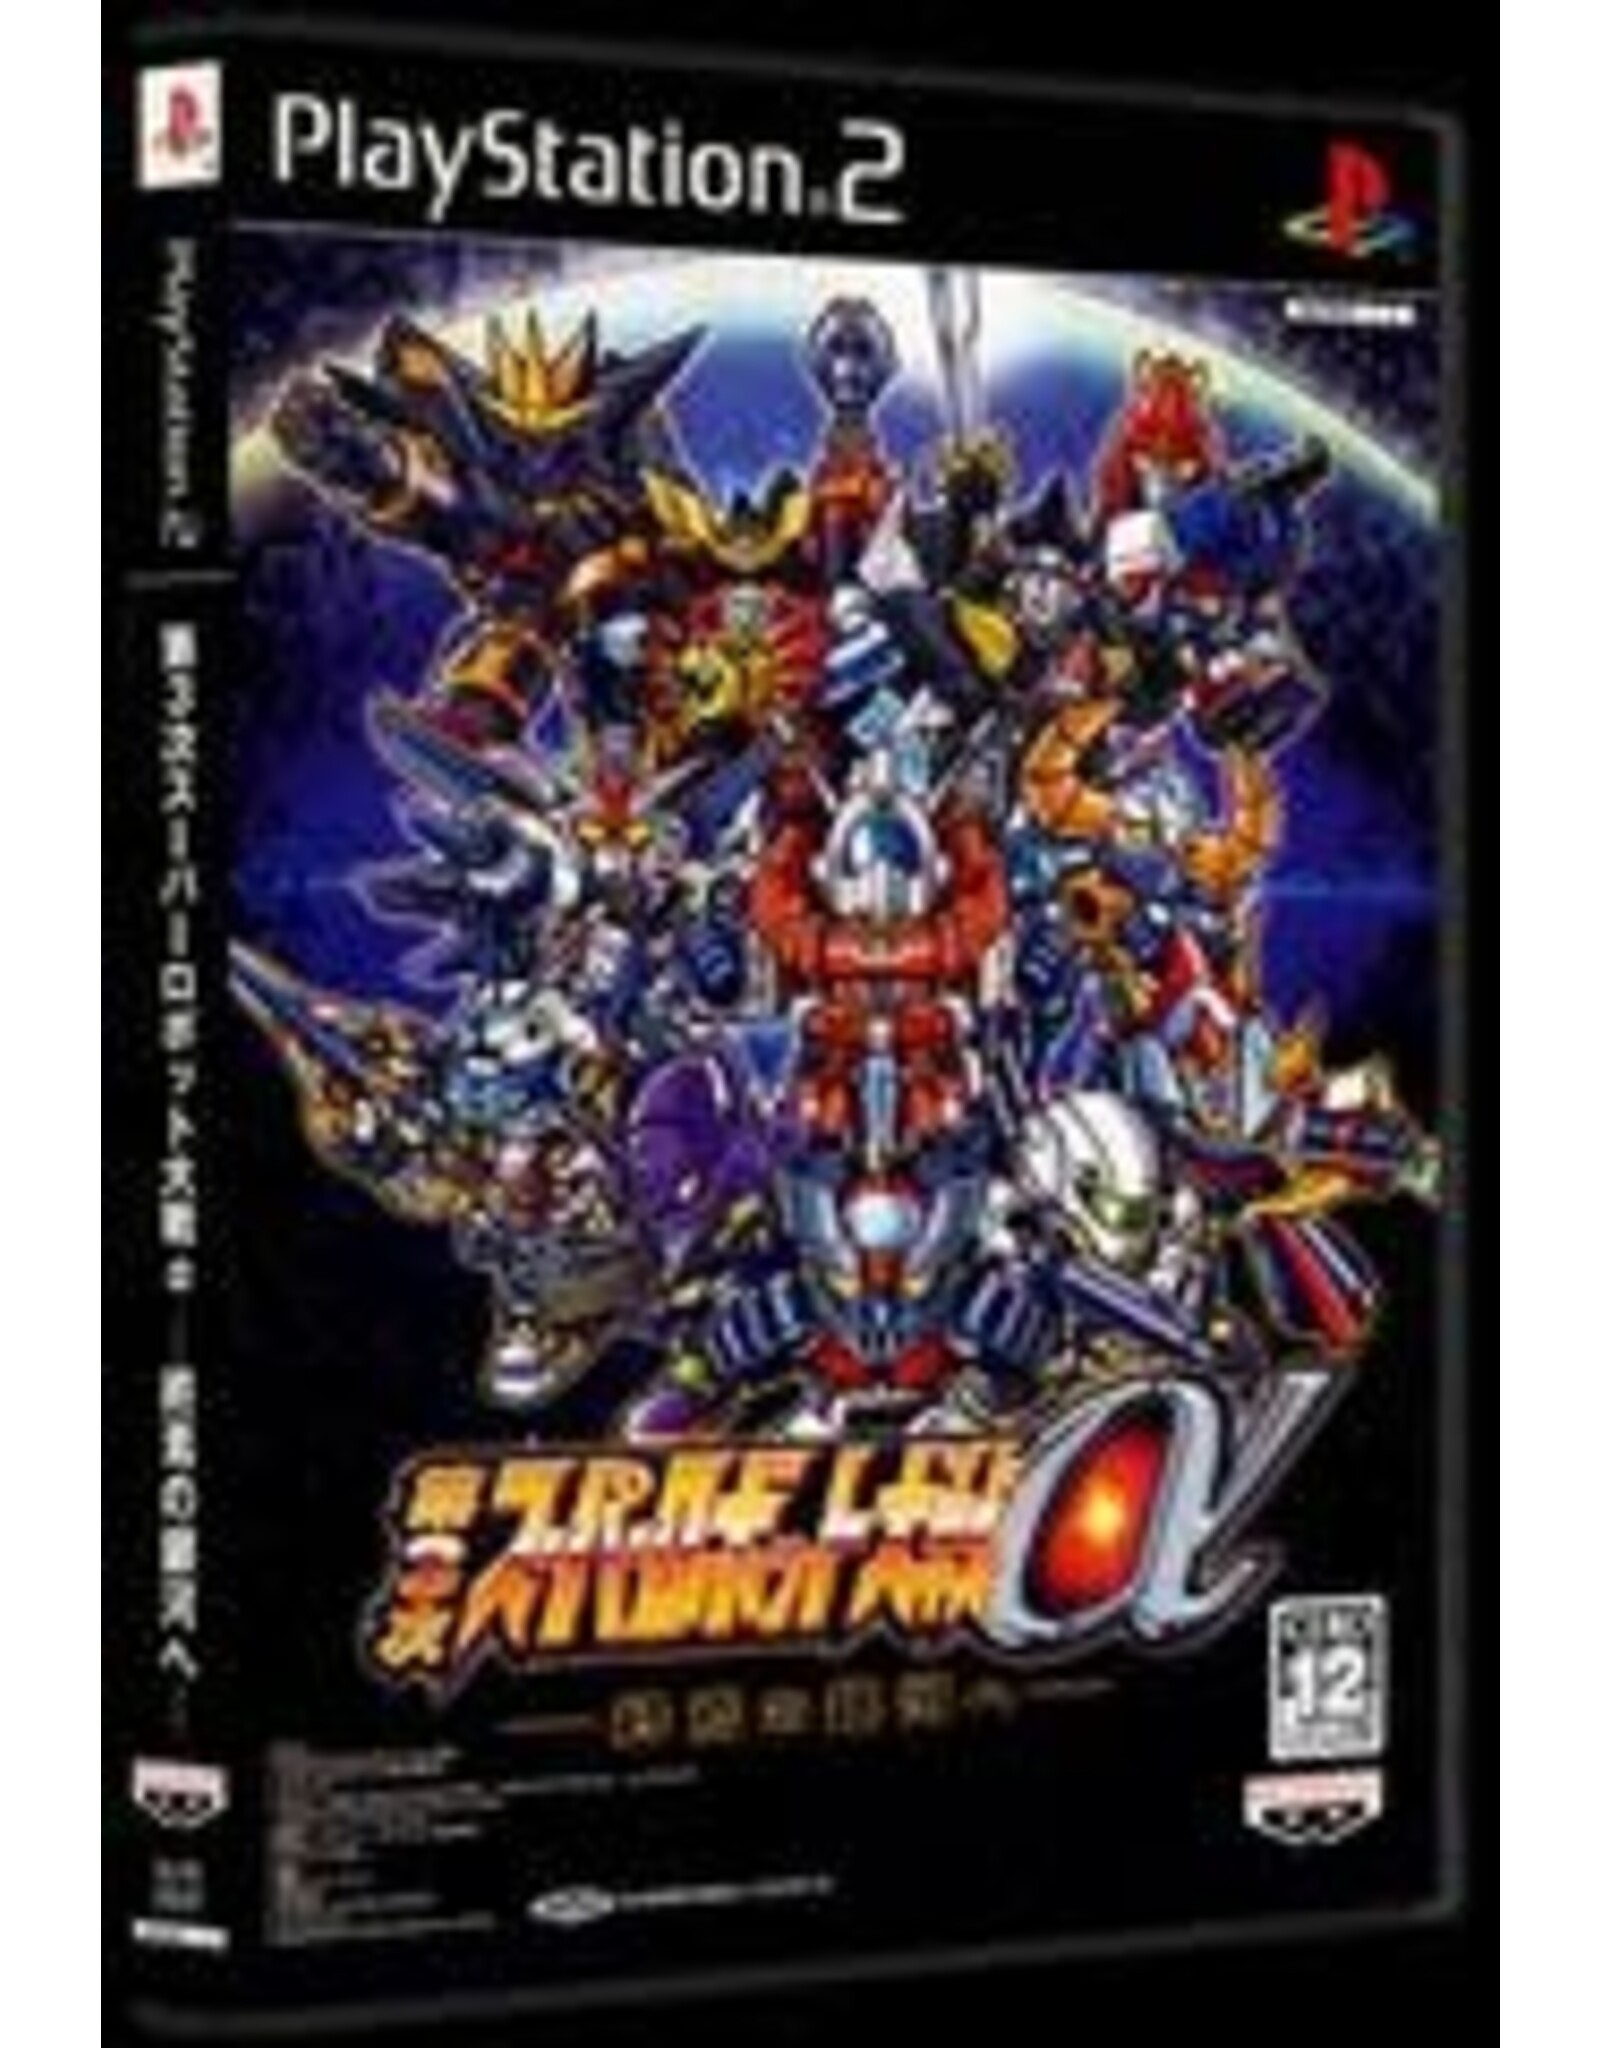 Playstation 2 3rd Super Robot Wars Alpha: To the End of the Galaxy (CiB, JP Import)